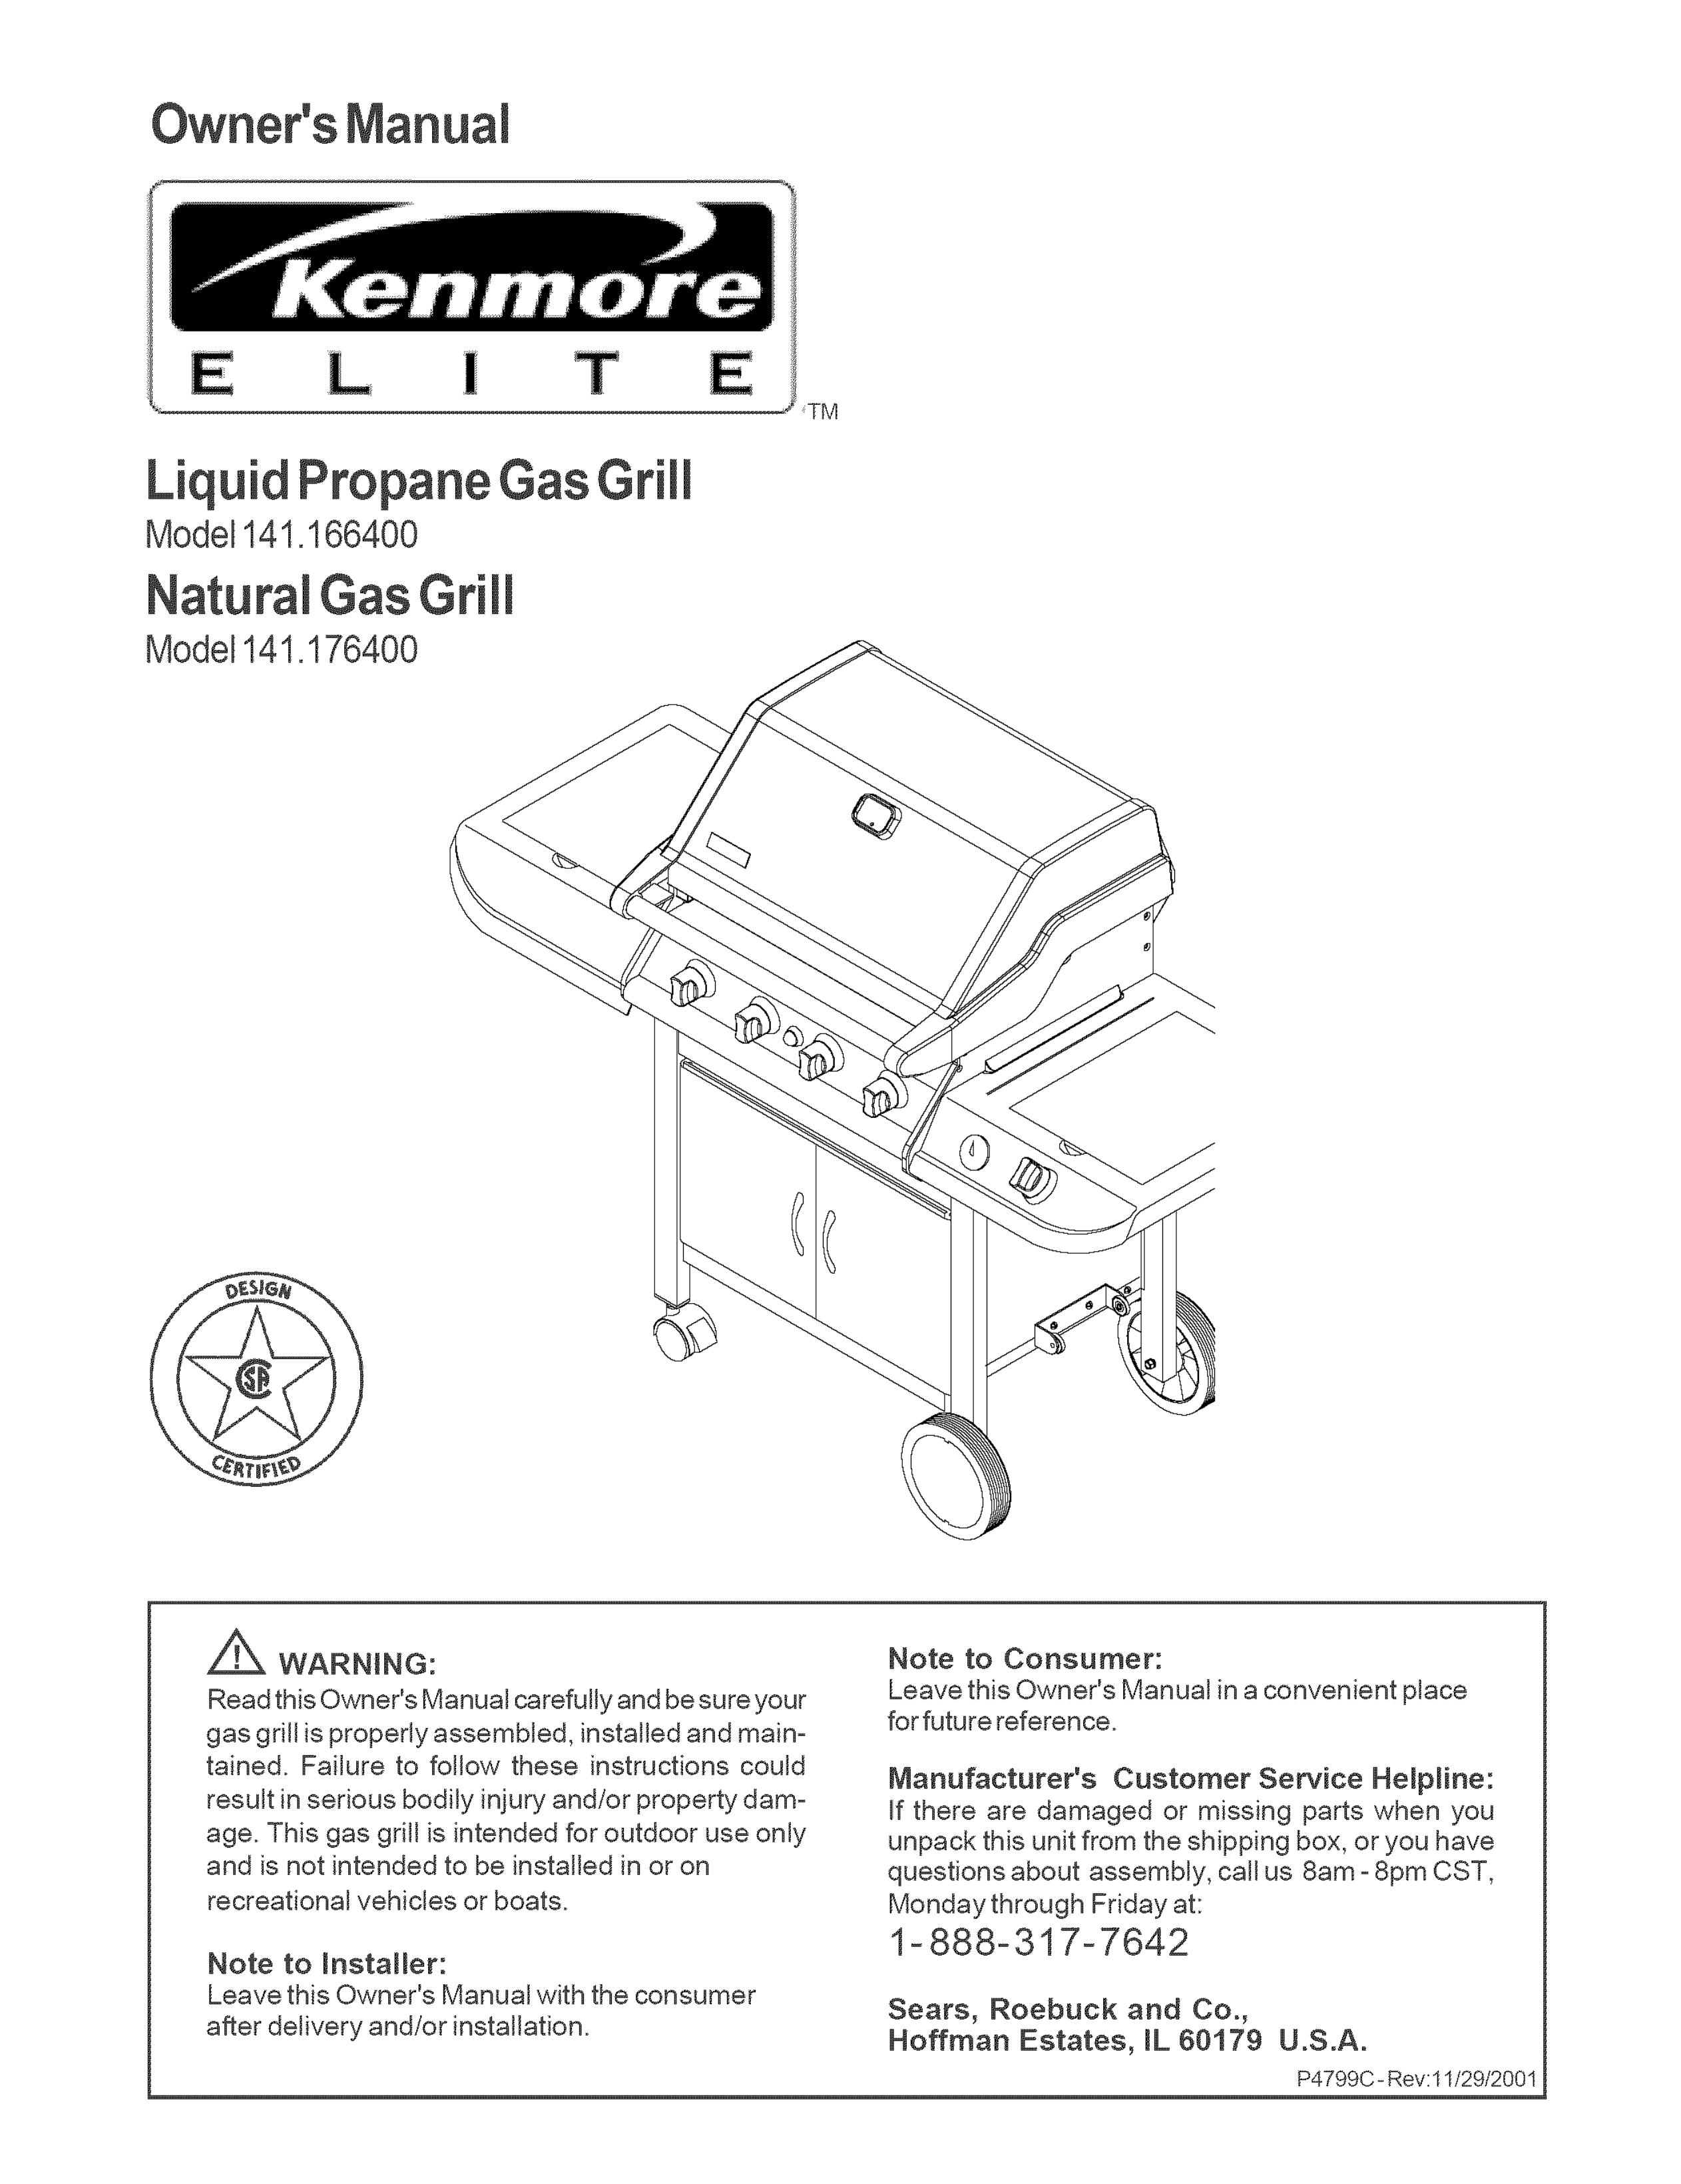 Kenmore 141.1664 Gas Grill User Manual